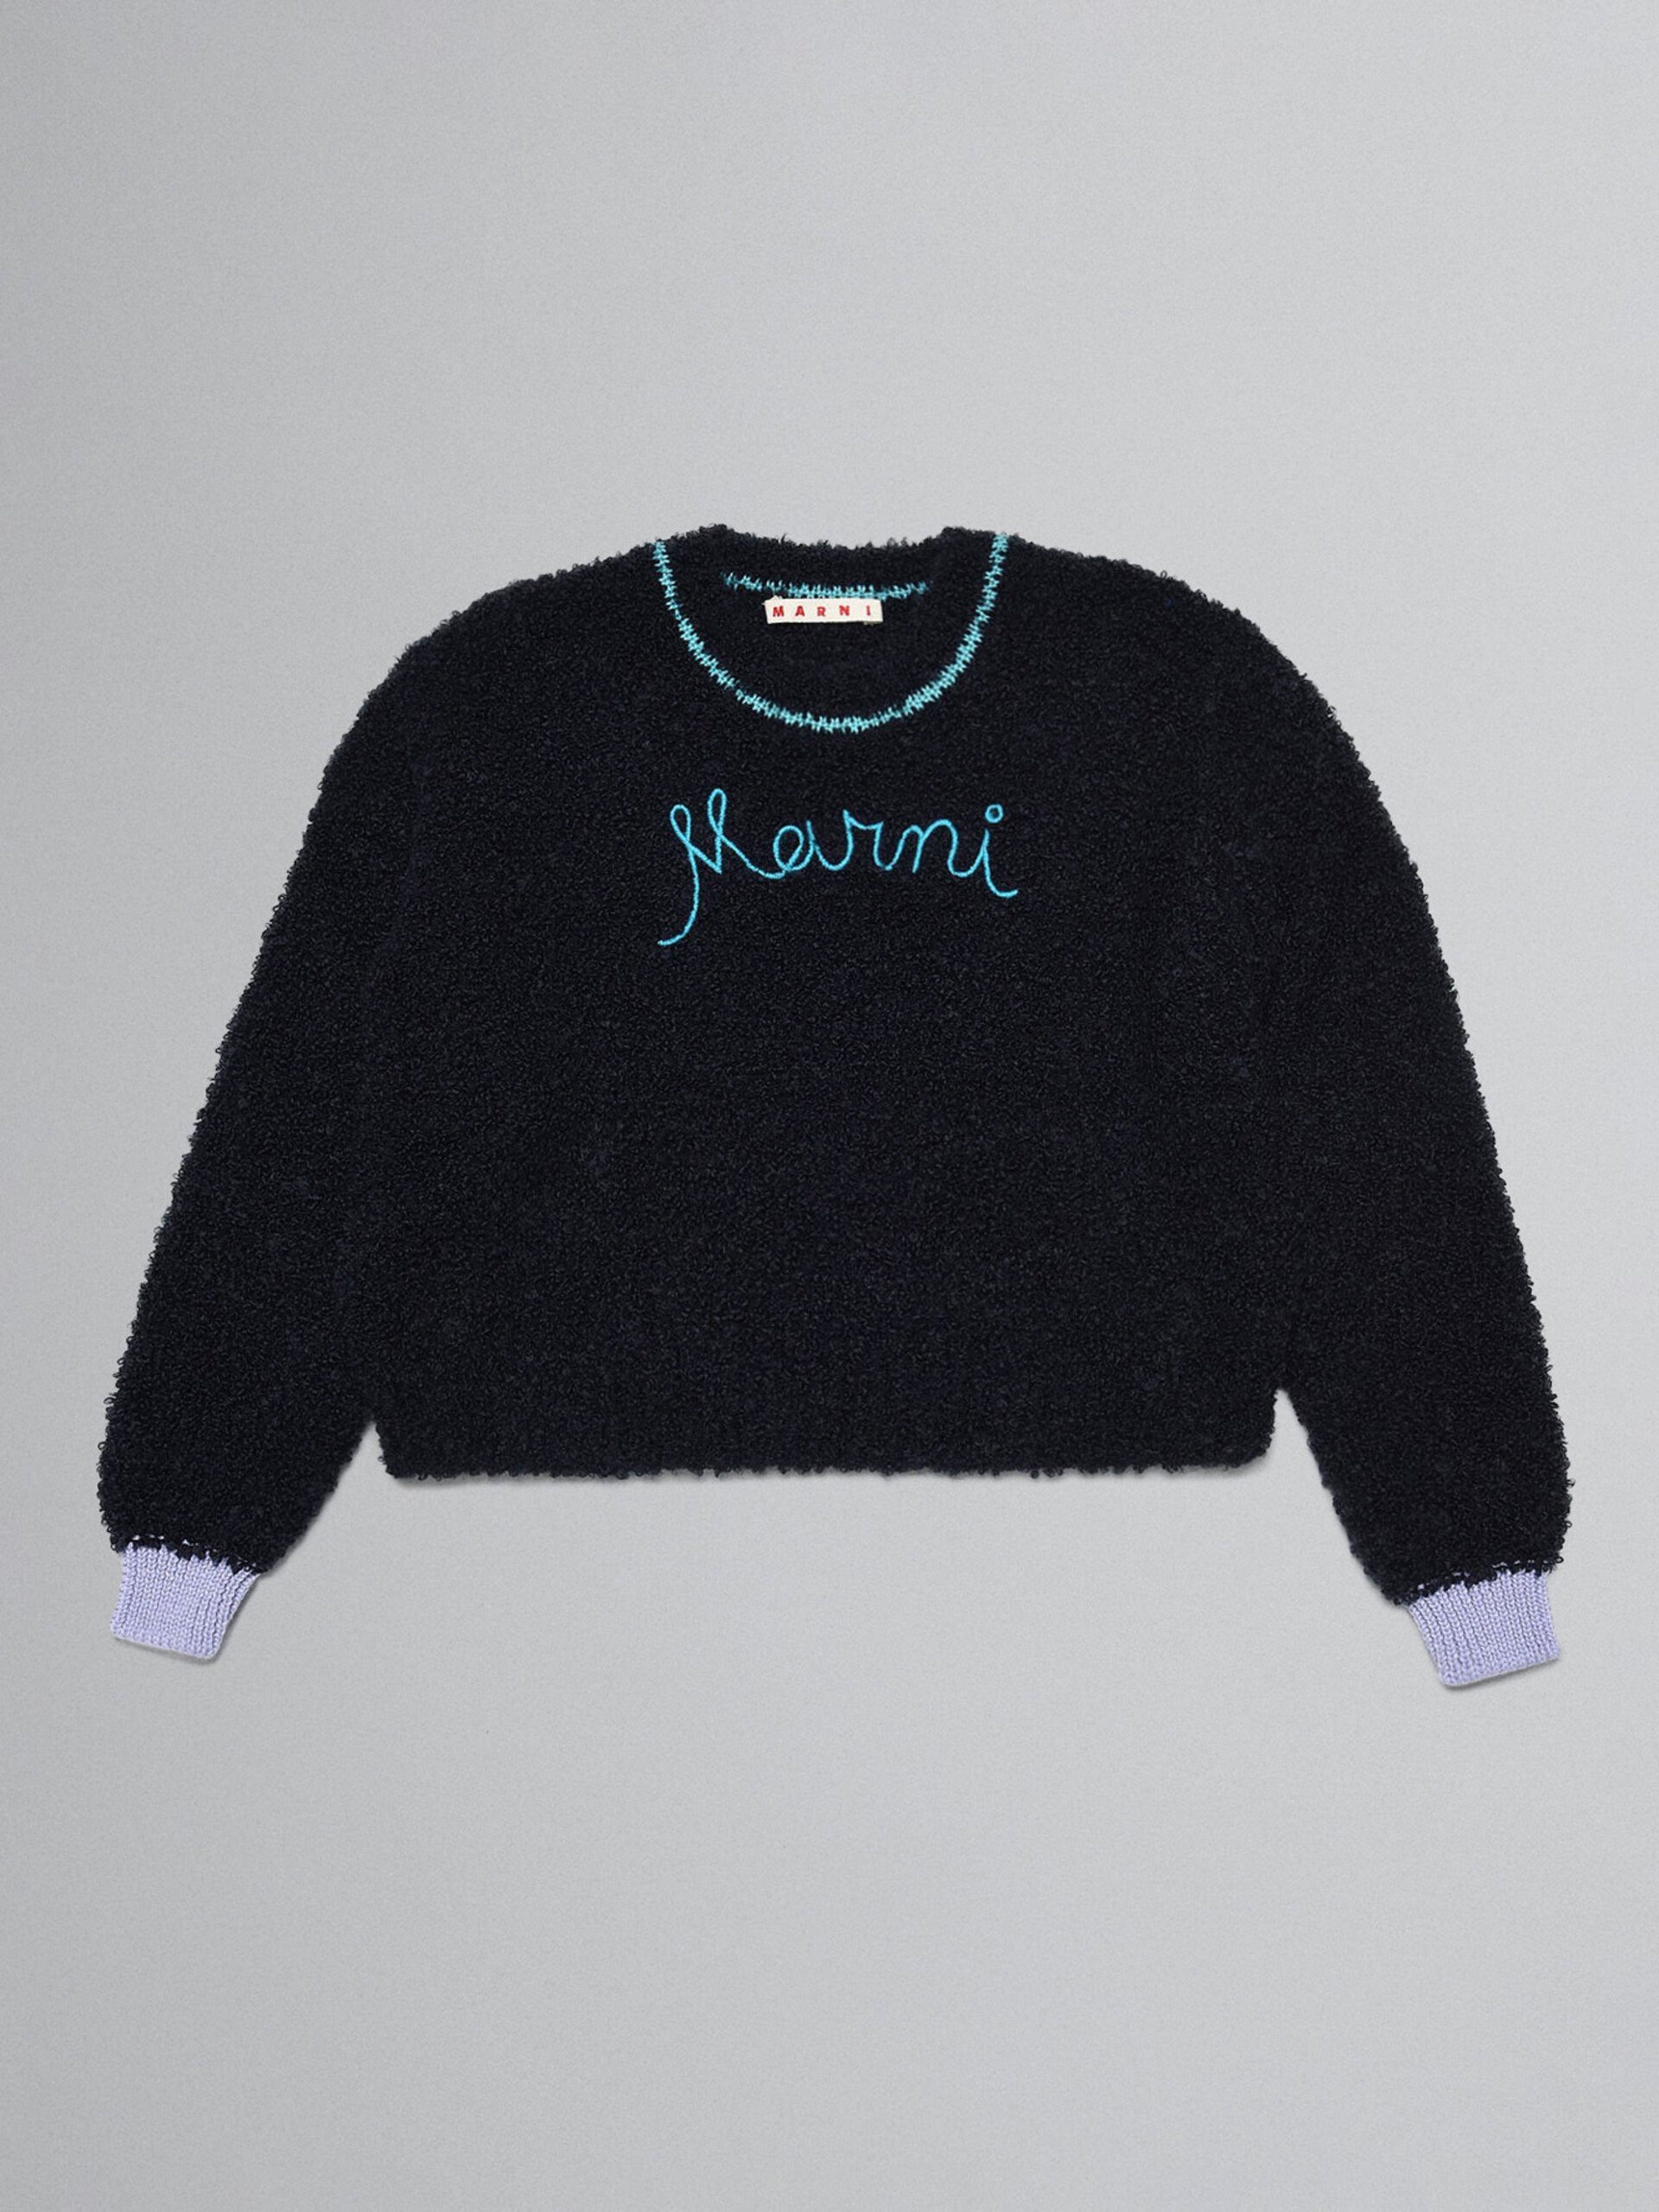 Navy blue teddy sweater with embroidery - Knitwear - Image 1